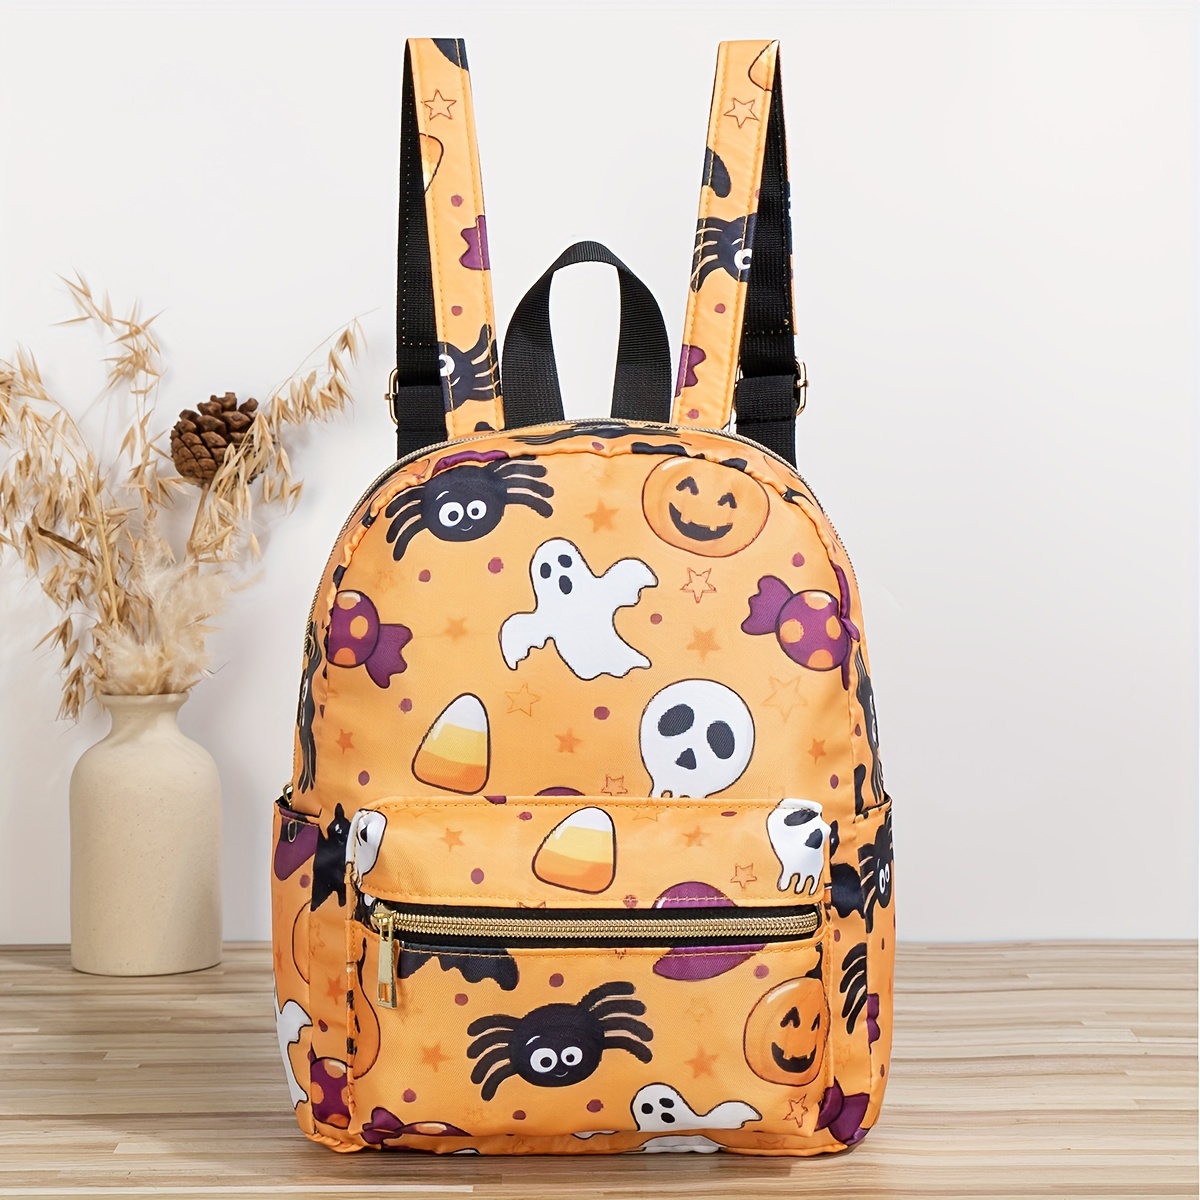 Sports Bags, Gifts